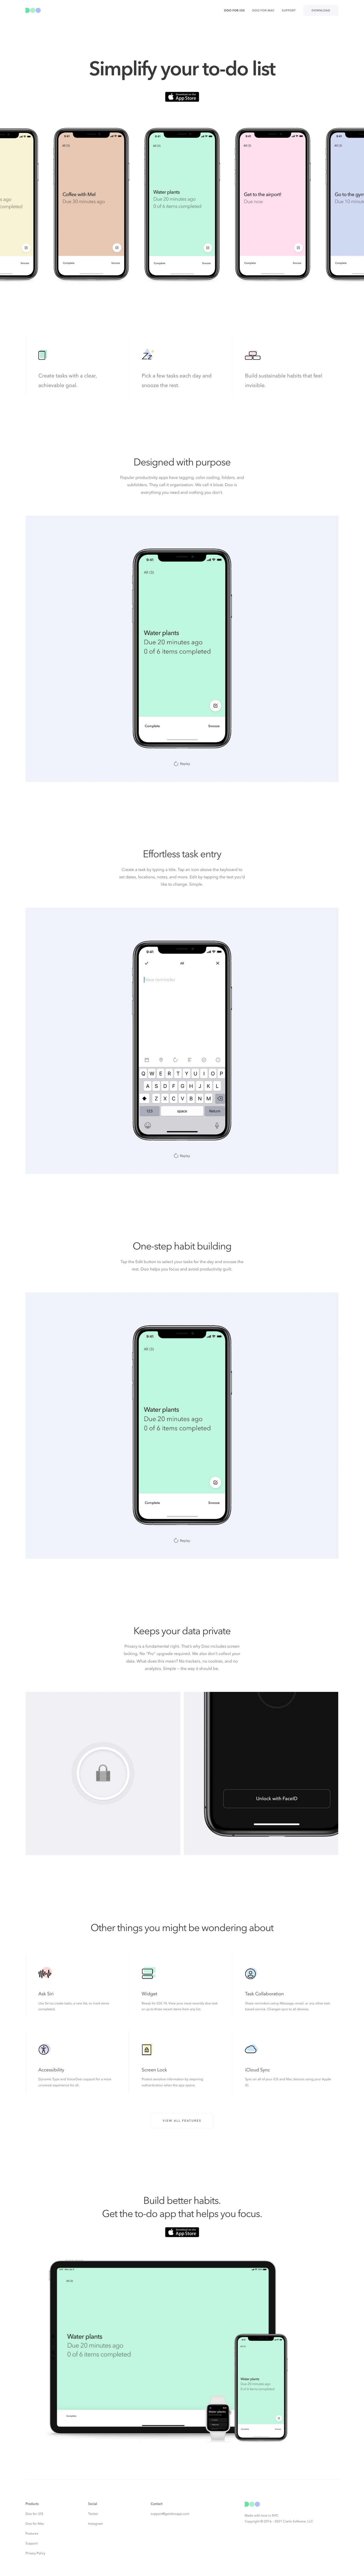 Doo Landing Page Example: Build better habits and make progress each day with a to-do app designed to help you focus. Download for iPhone, iPad, and Mac.